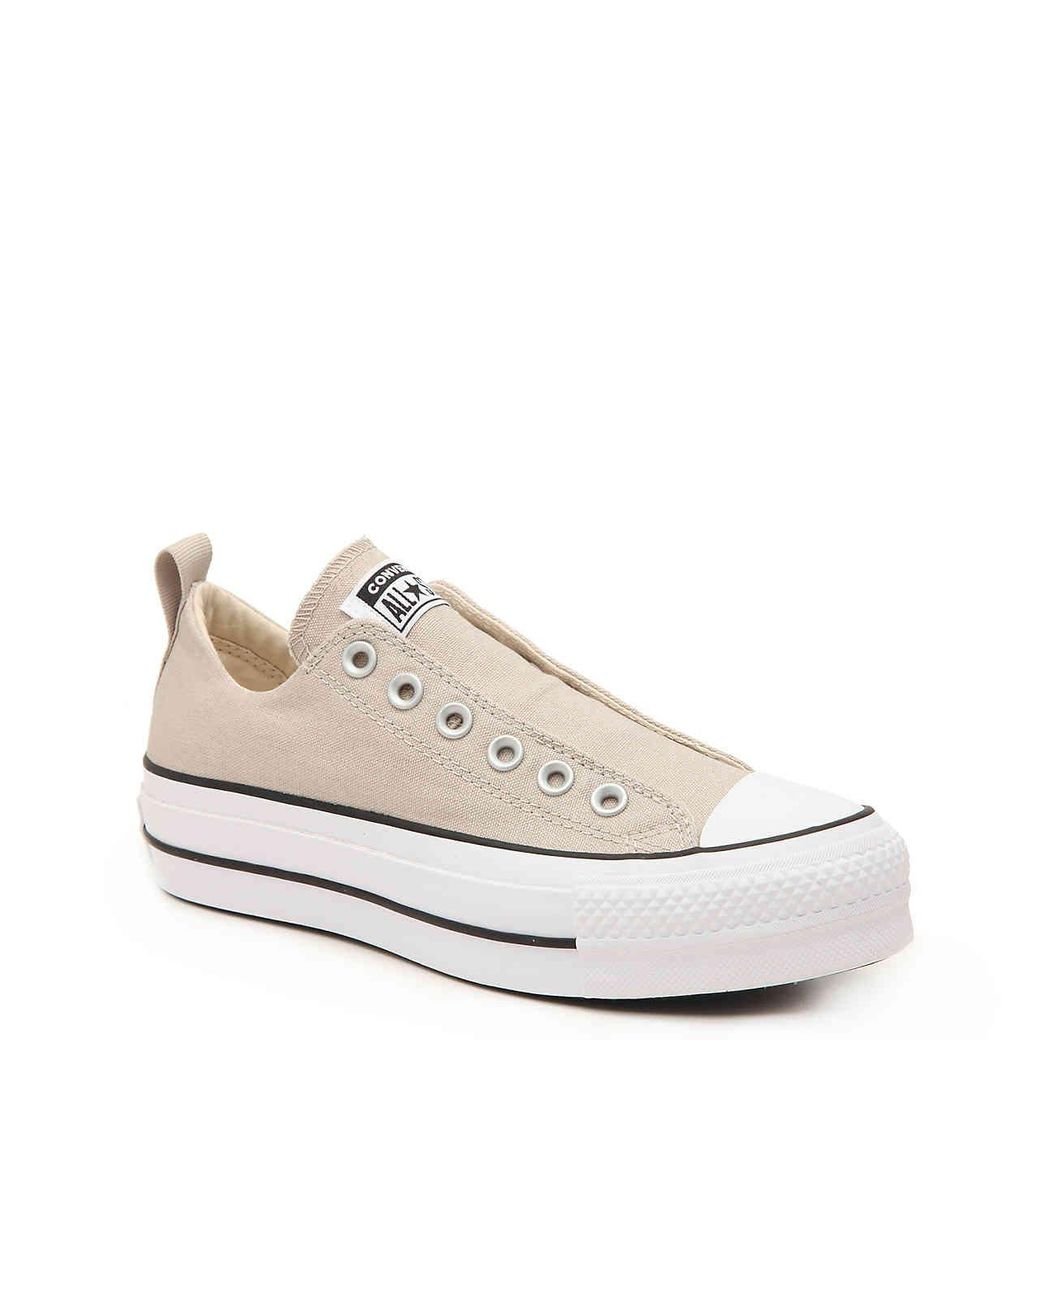 Converse Chuck Taylor All Star Fashion Lift Platform Slip-on Sneaker in  Natural | Lyst